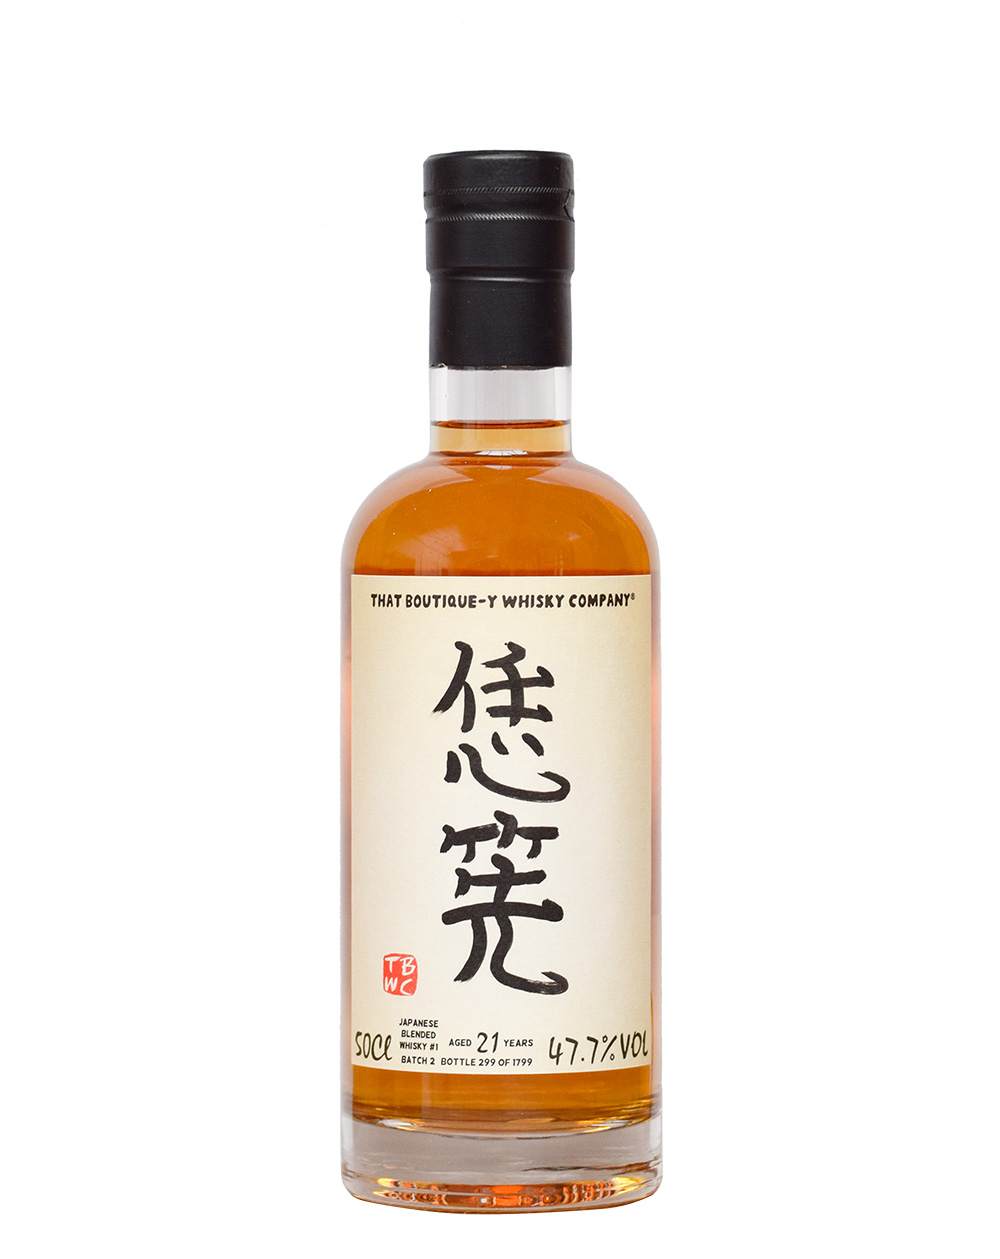 Japanese Blended Whisky #1 - That Boutique-y Whisky Company TBWC Batch 2 (21 Years Old) Musthave Malts MHM